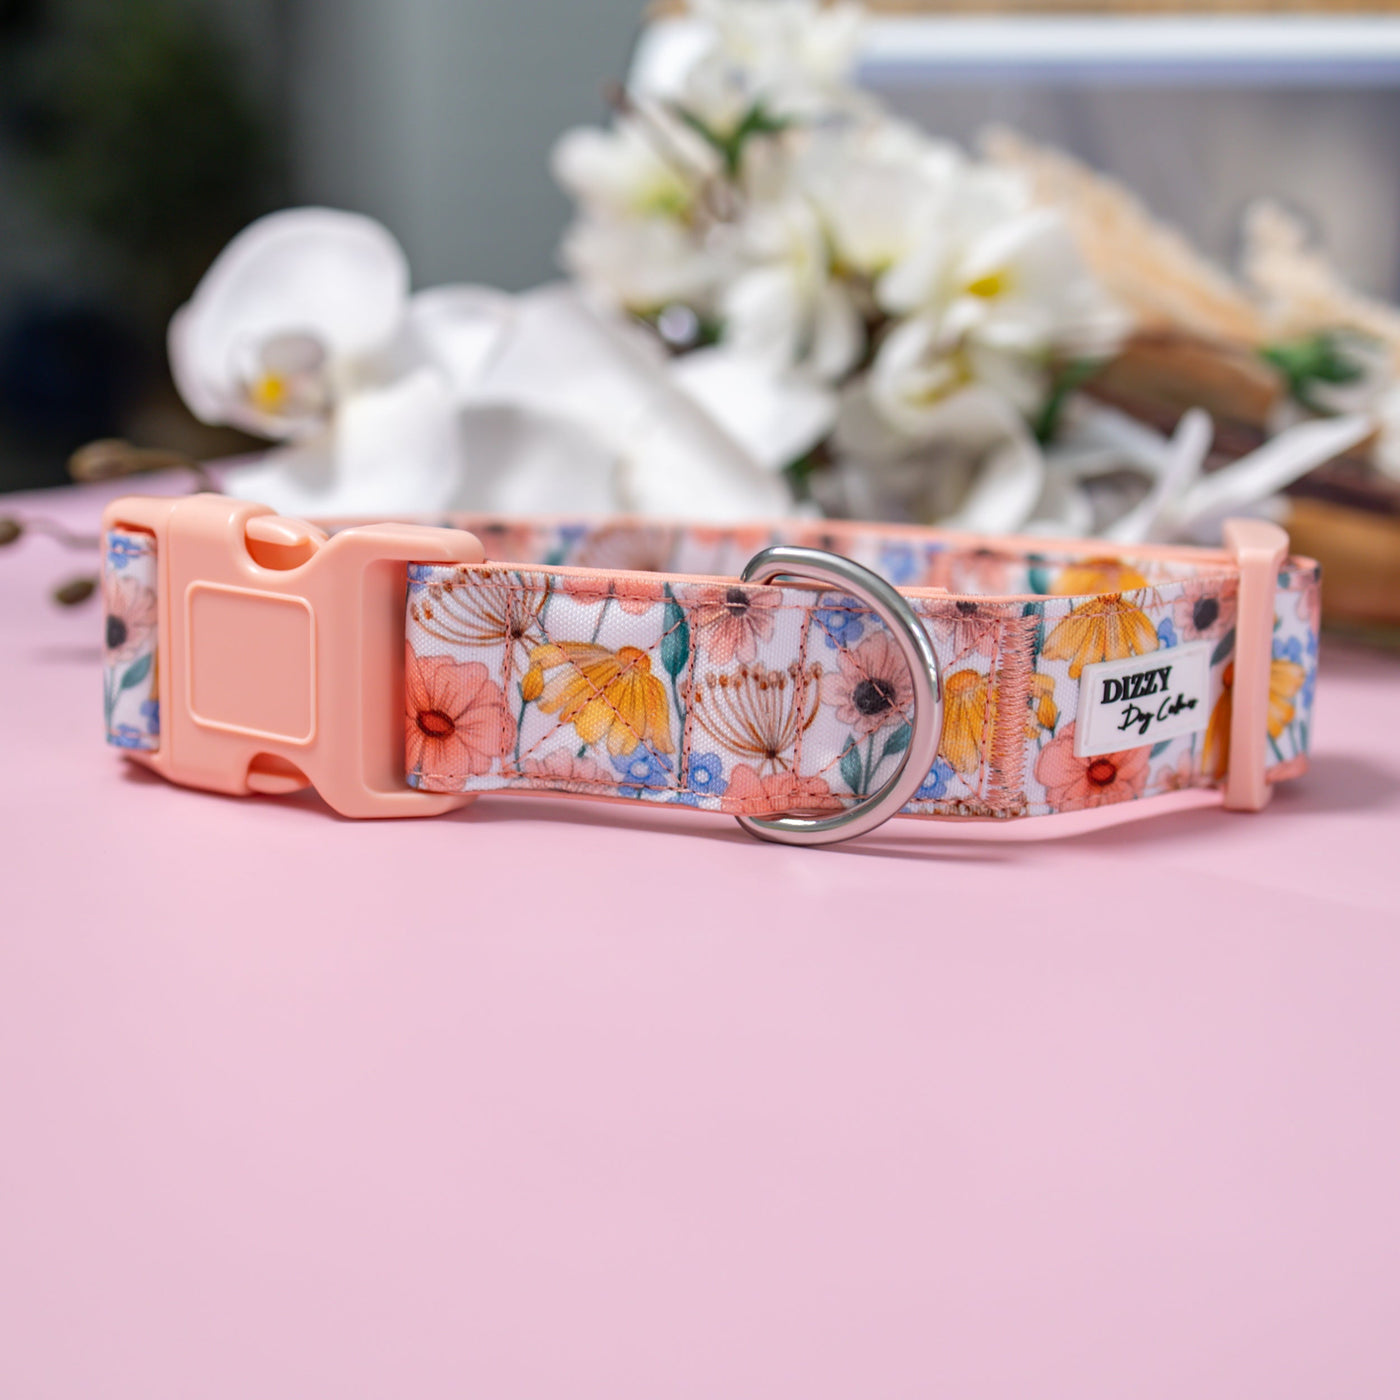 Extra Wide // Peachy Posies Dog Collar | Canvas & Neoprene Dog Collar-Dog Collar-Dizzy Dog Collars